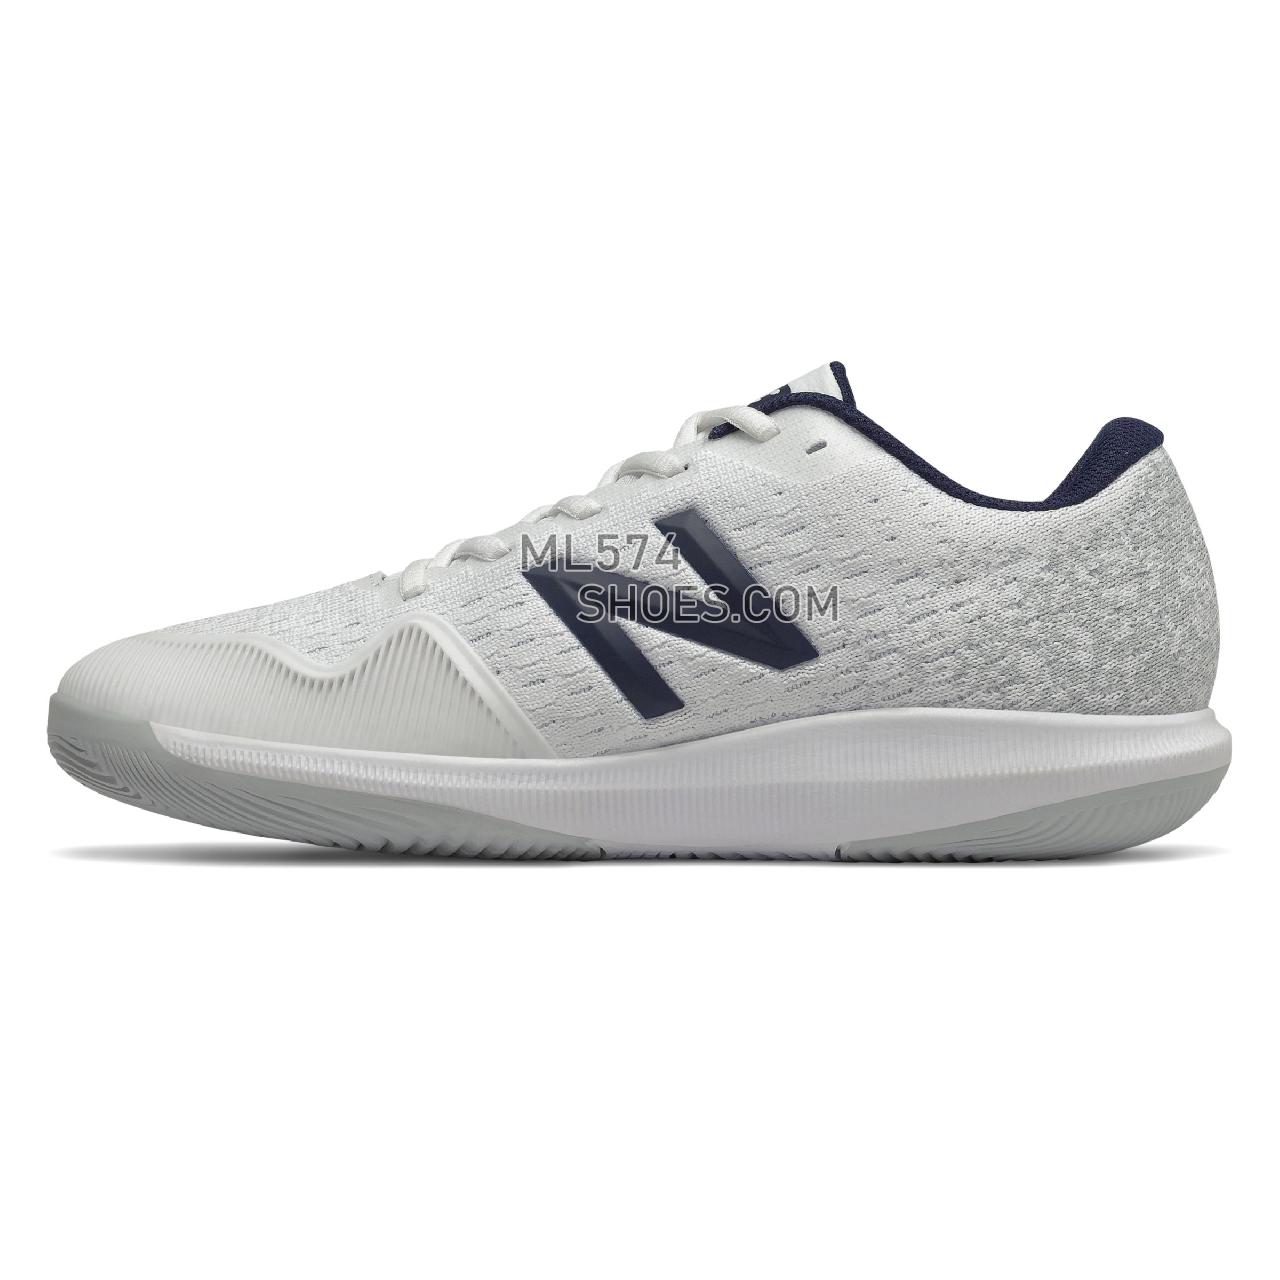 New Balance FuelCell 996v4 - Men's Tennis - White with Grey - MCH996W4